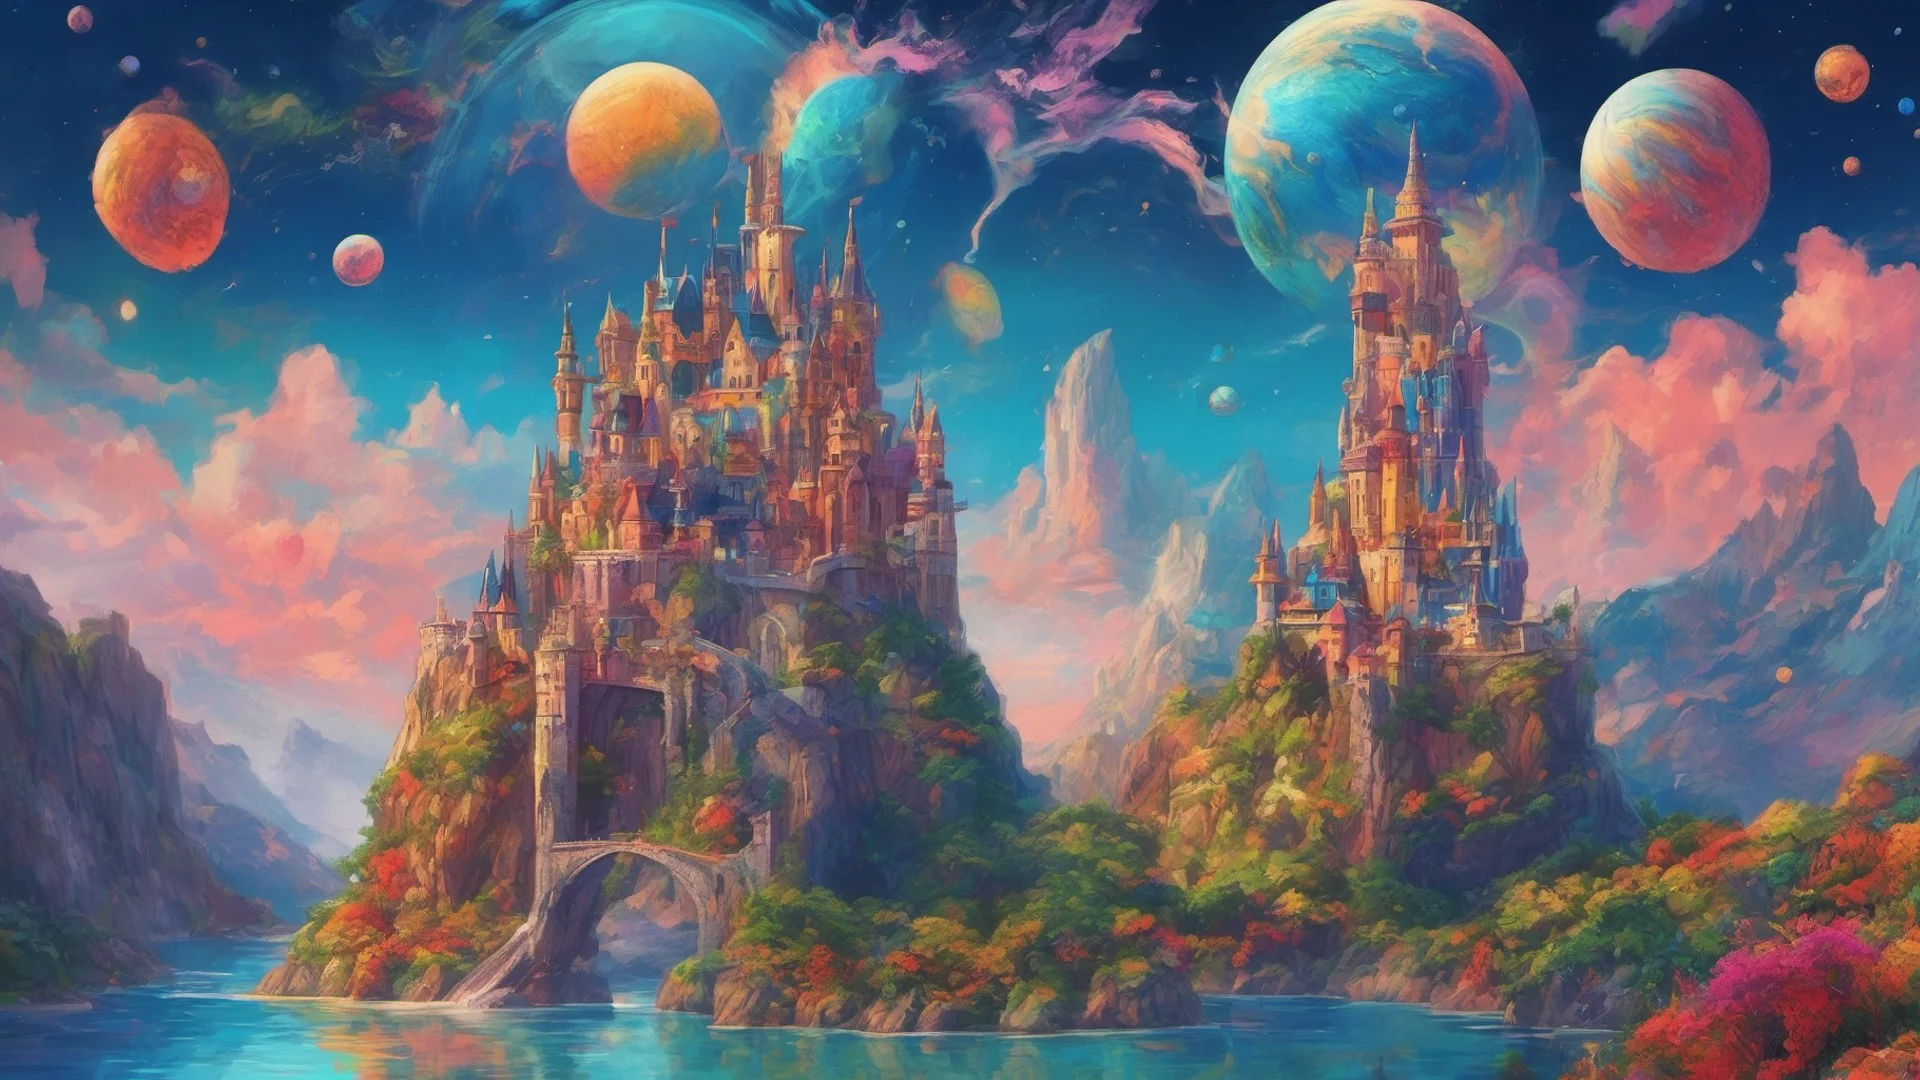 castle colorful planets in sky large dragon above castle ravine blue tropical ocean colorful gorgeous stunning trending  amazing awesome portrait 2 wide